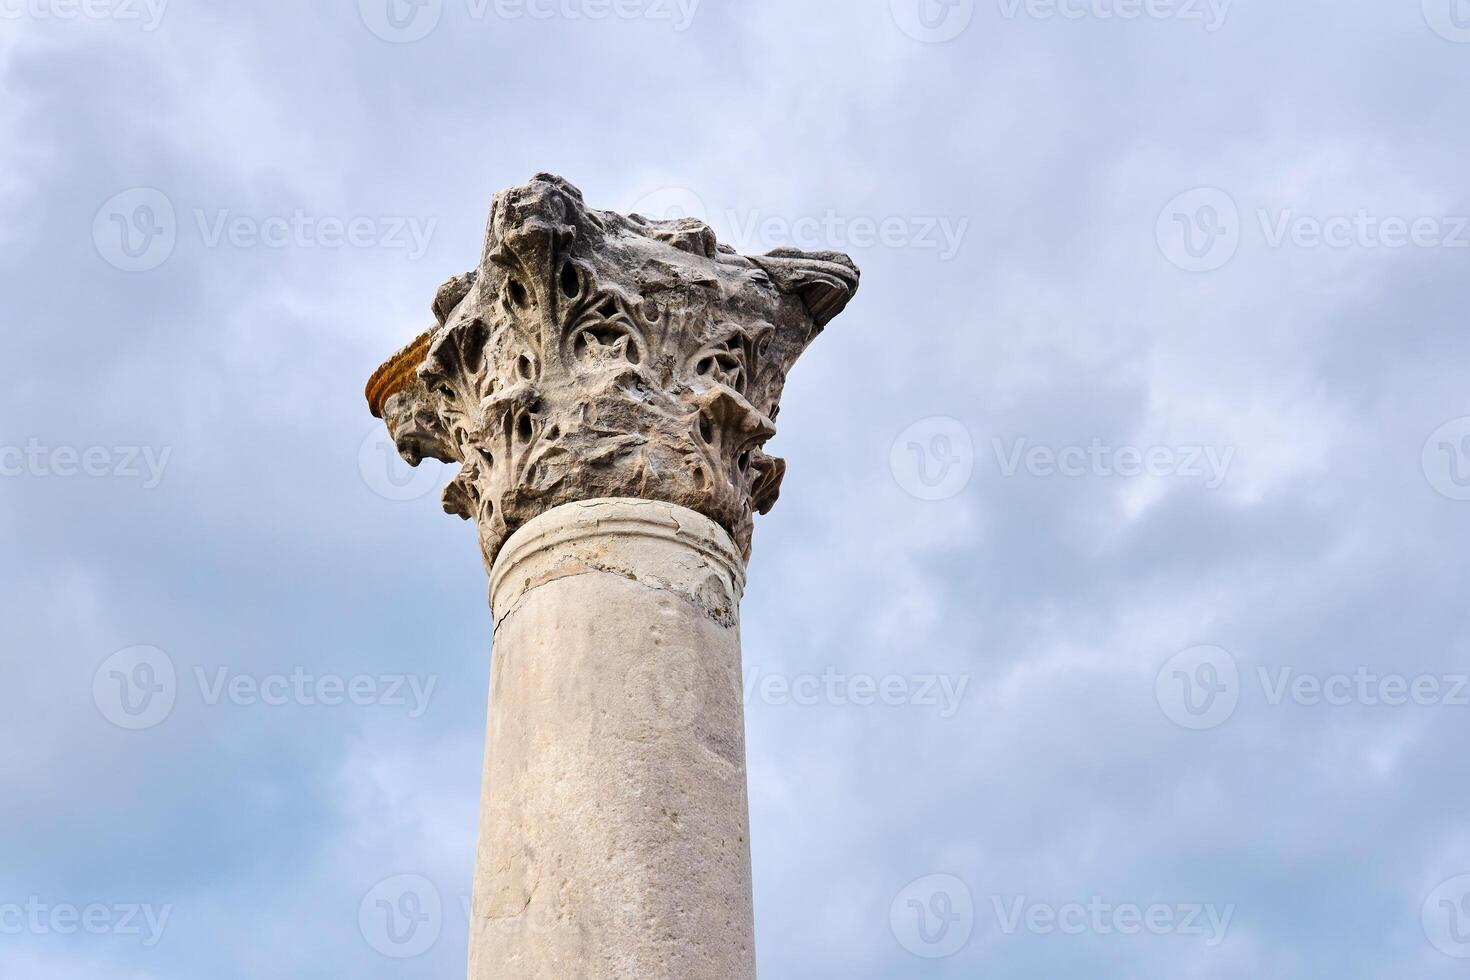 weathered capital of an antique column in the Corinthian order style against the sky photo